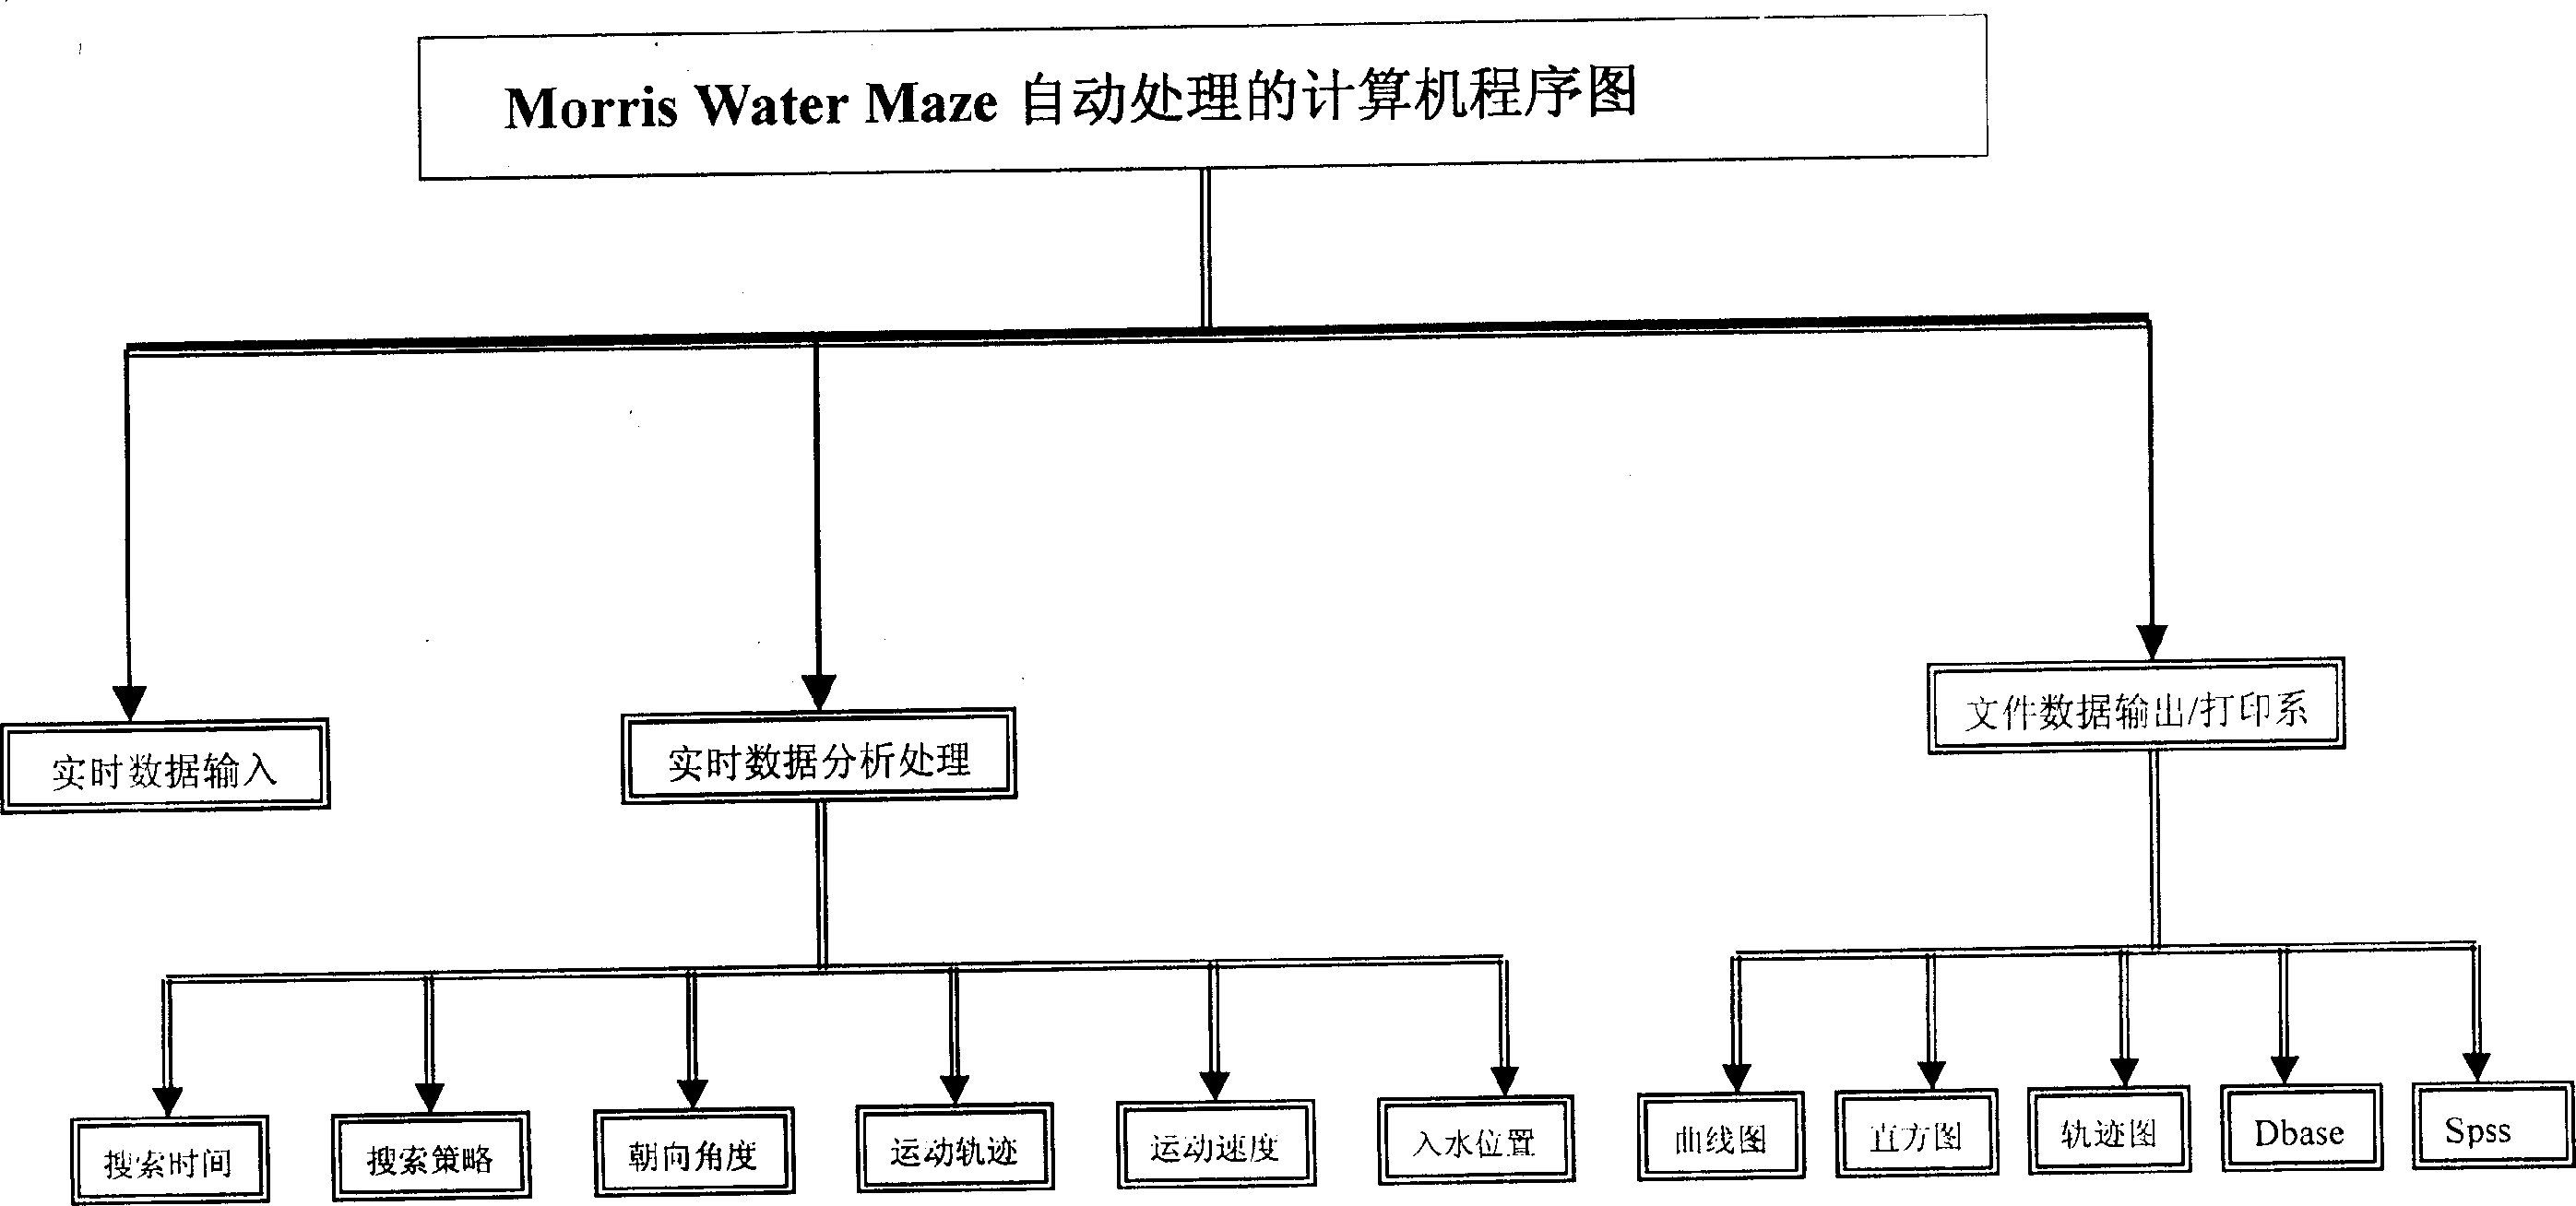 Automatic water maze image processing system and method